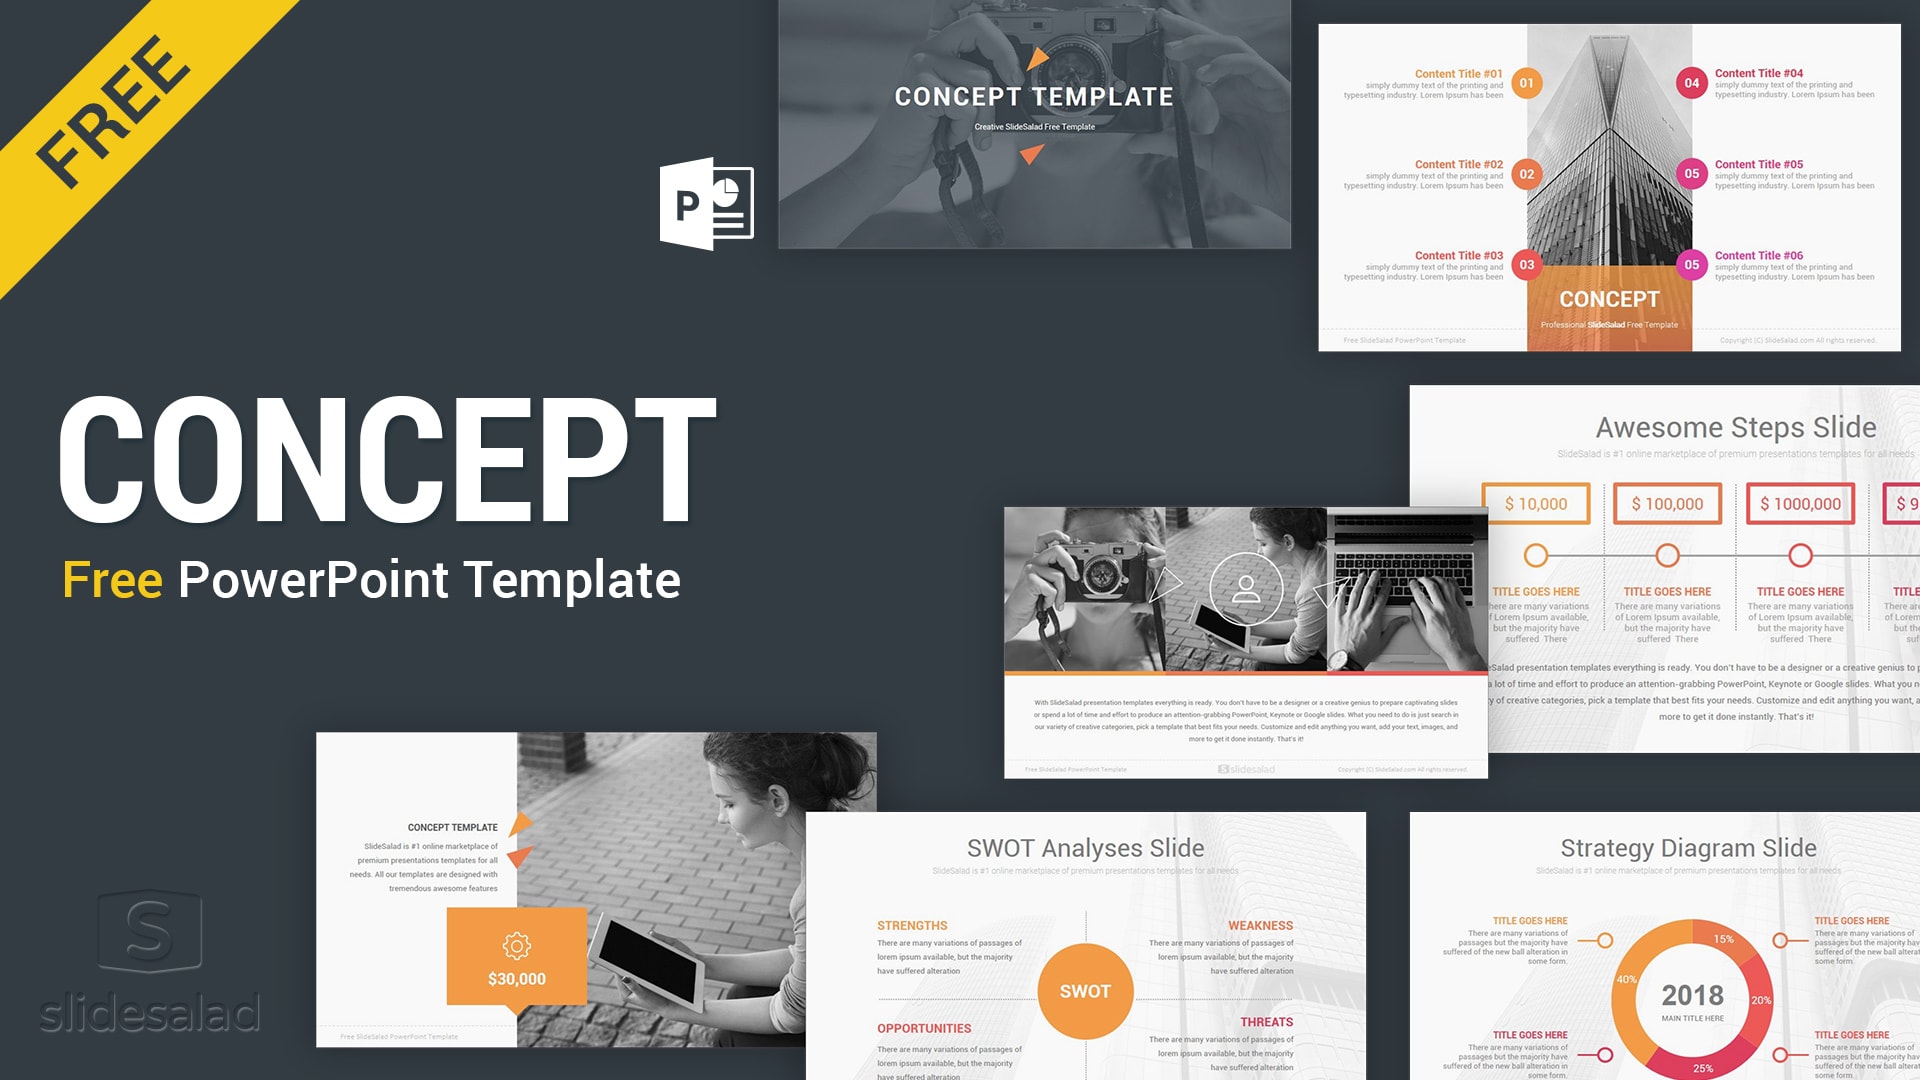 Concept Free PowerPoint Presentation Template - Free Download PPT Intended For Ppt Templates For Business Presentation Free Download